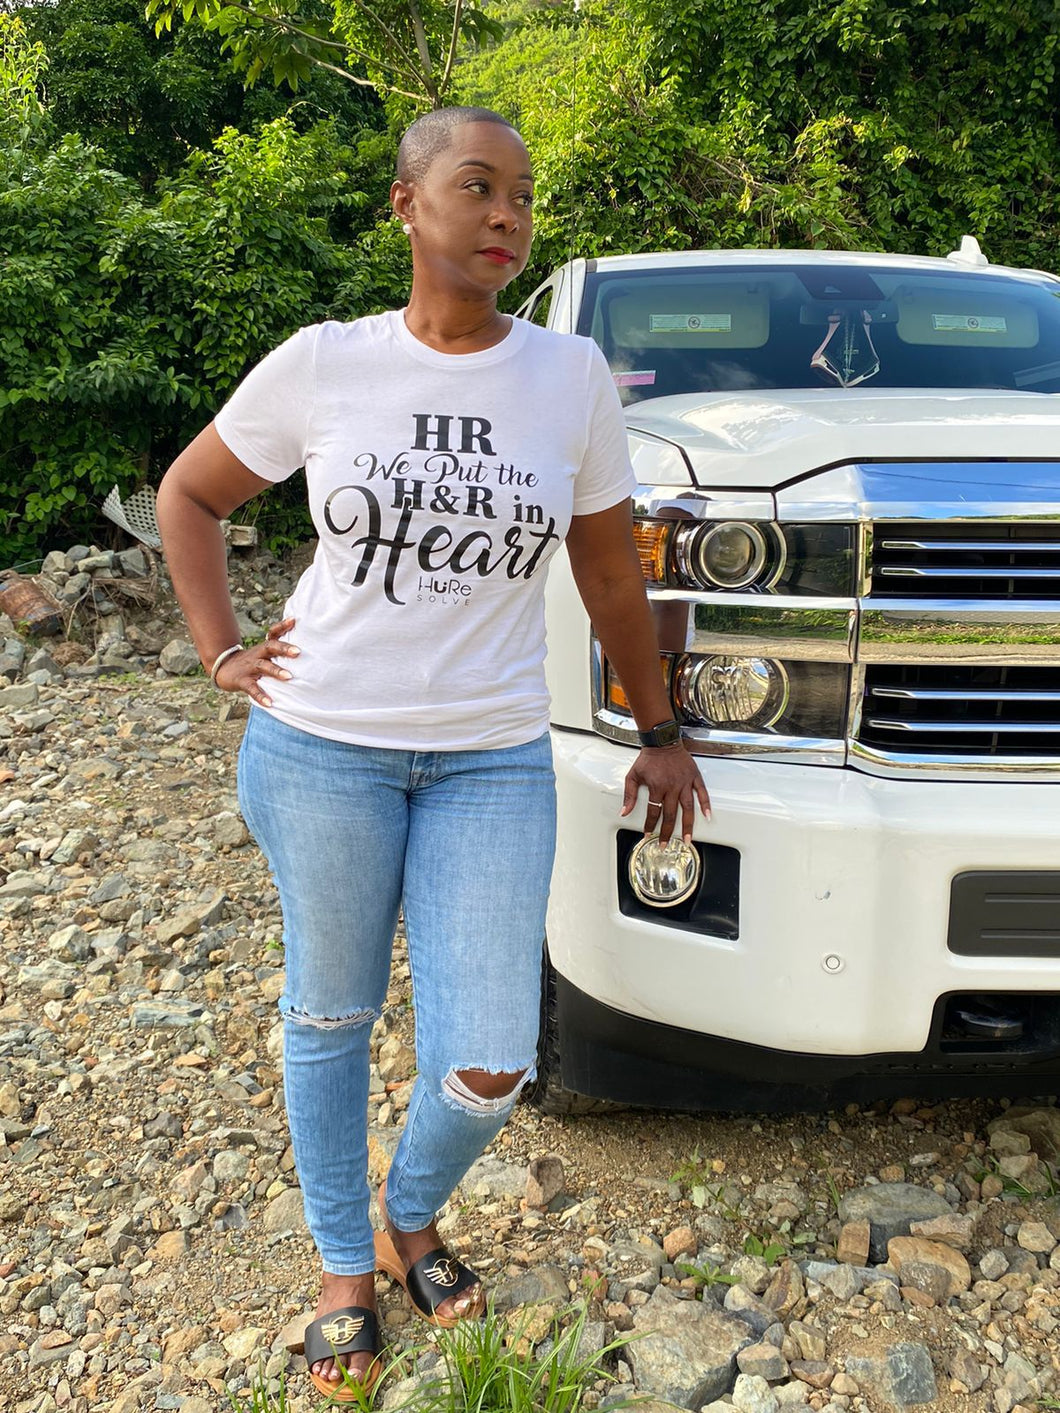 HR-We Put the H&R in Heart Tee